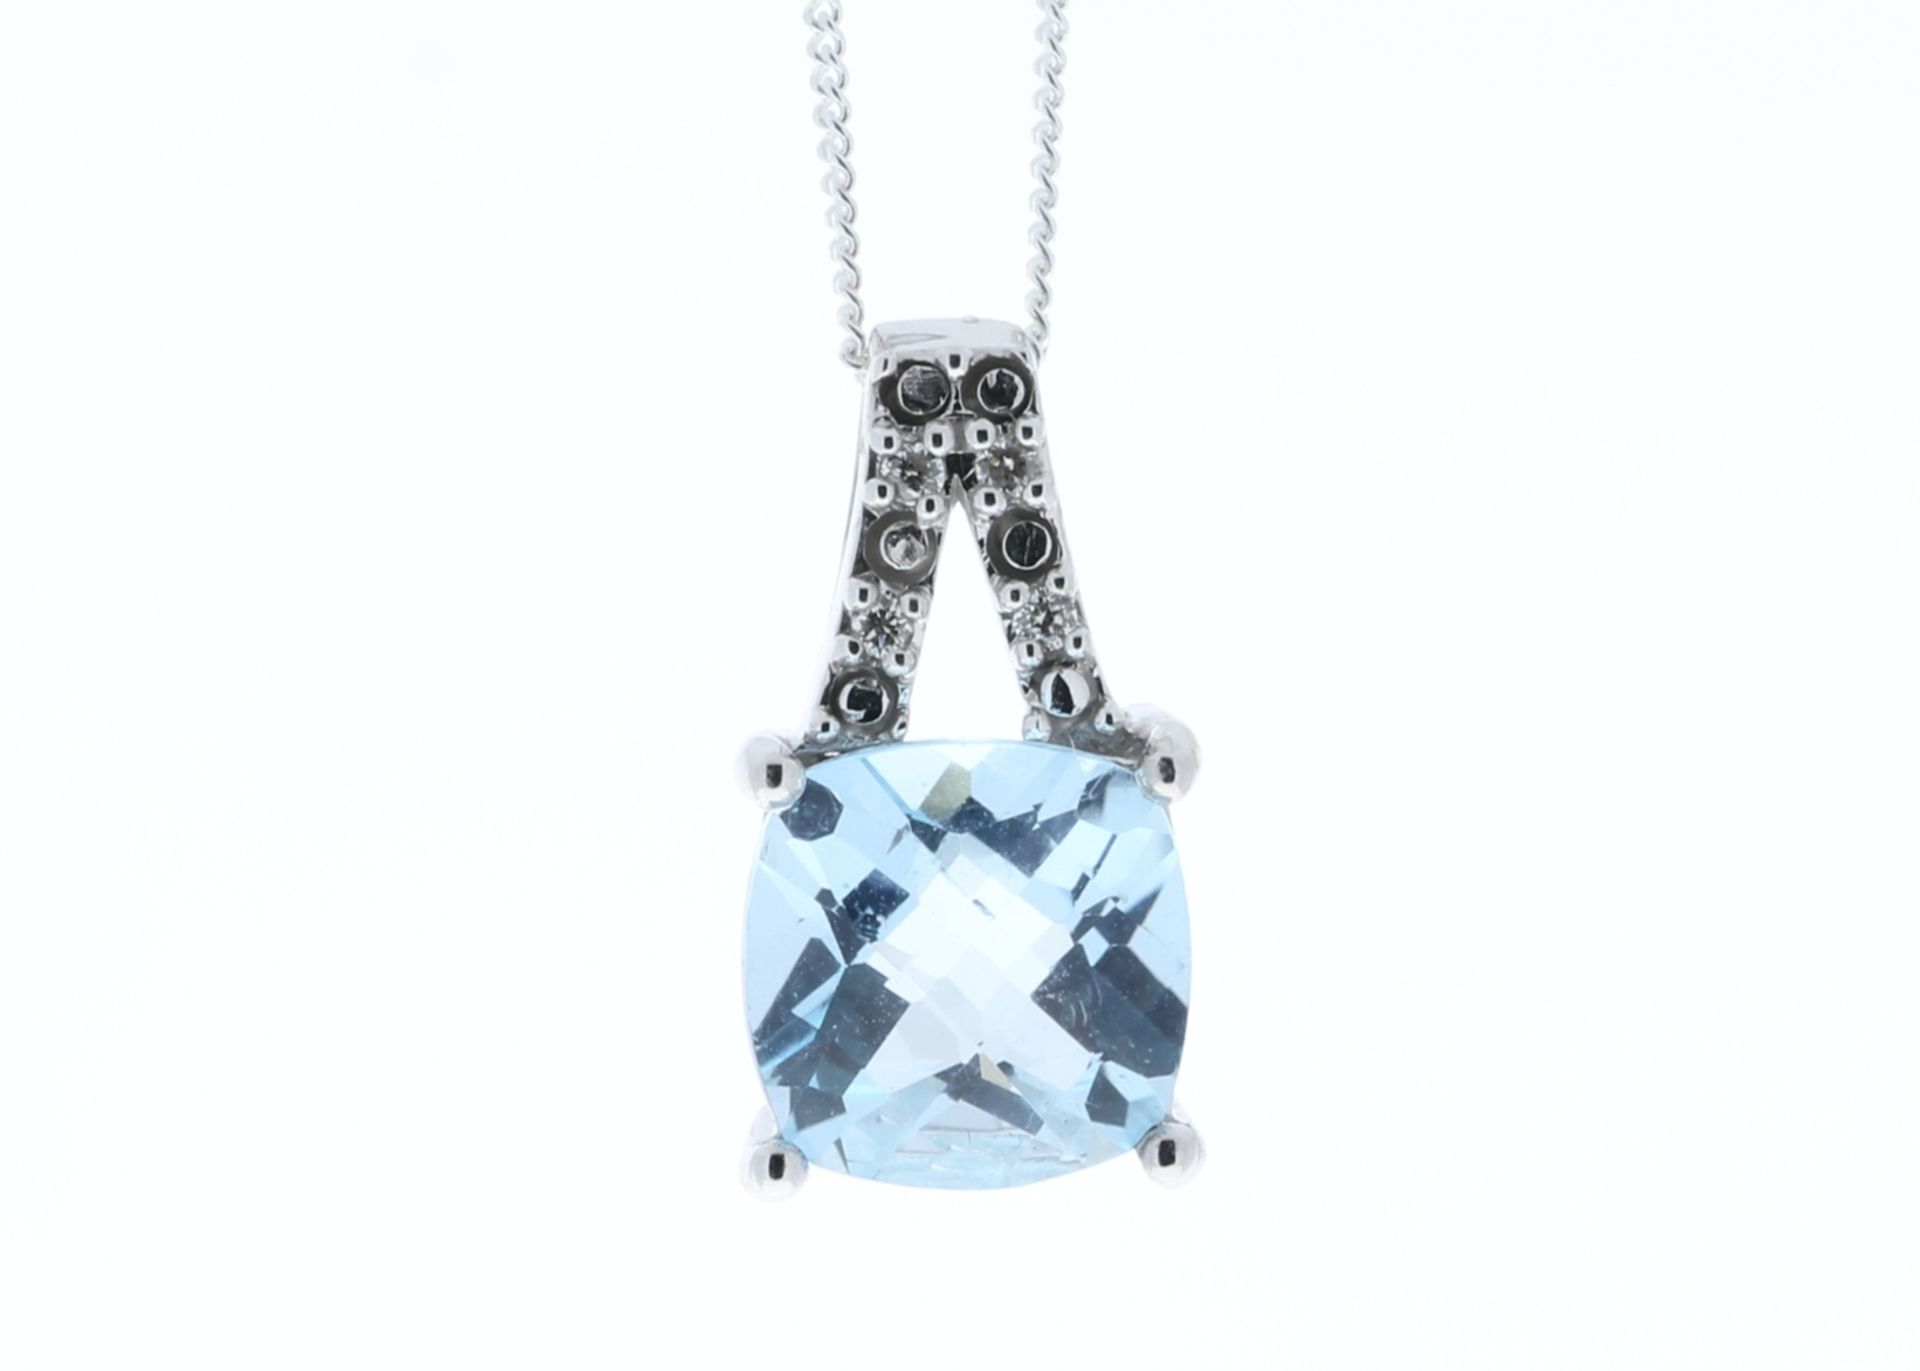 9ct White Gold Diamond And Blue Topaz Pendant (BT3.54) 0.05 Carats - Valued By GIE £1,470.00 - A - Image 6 of 10